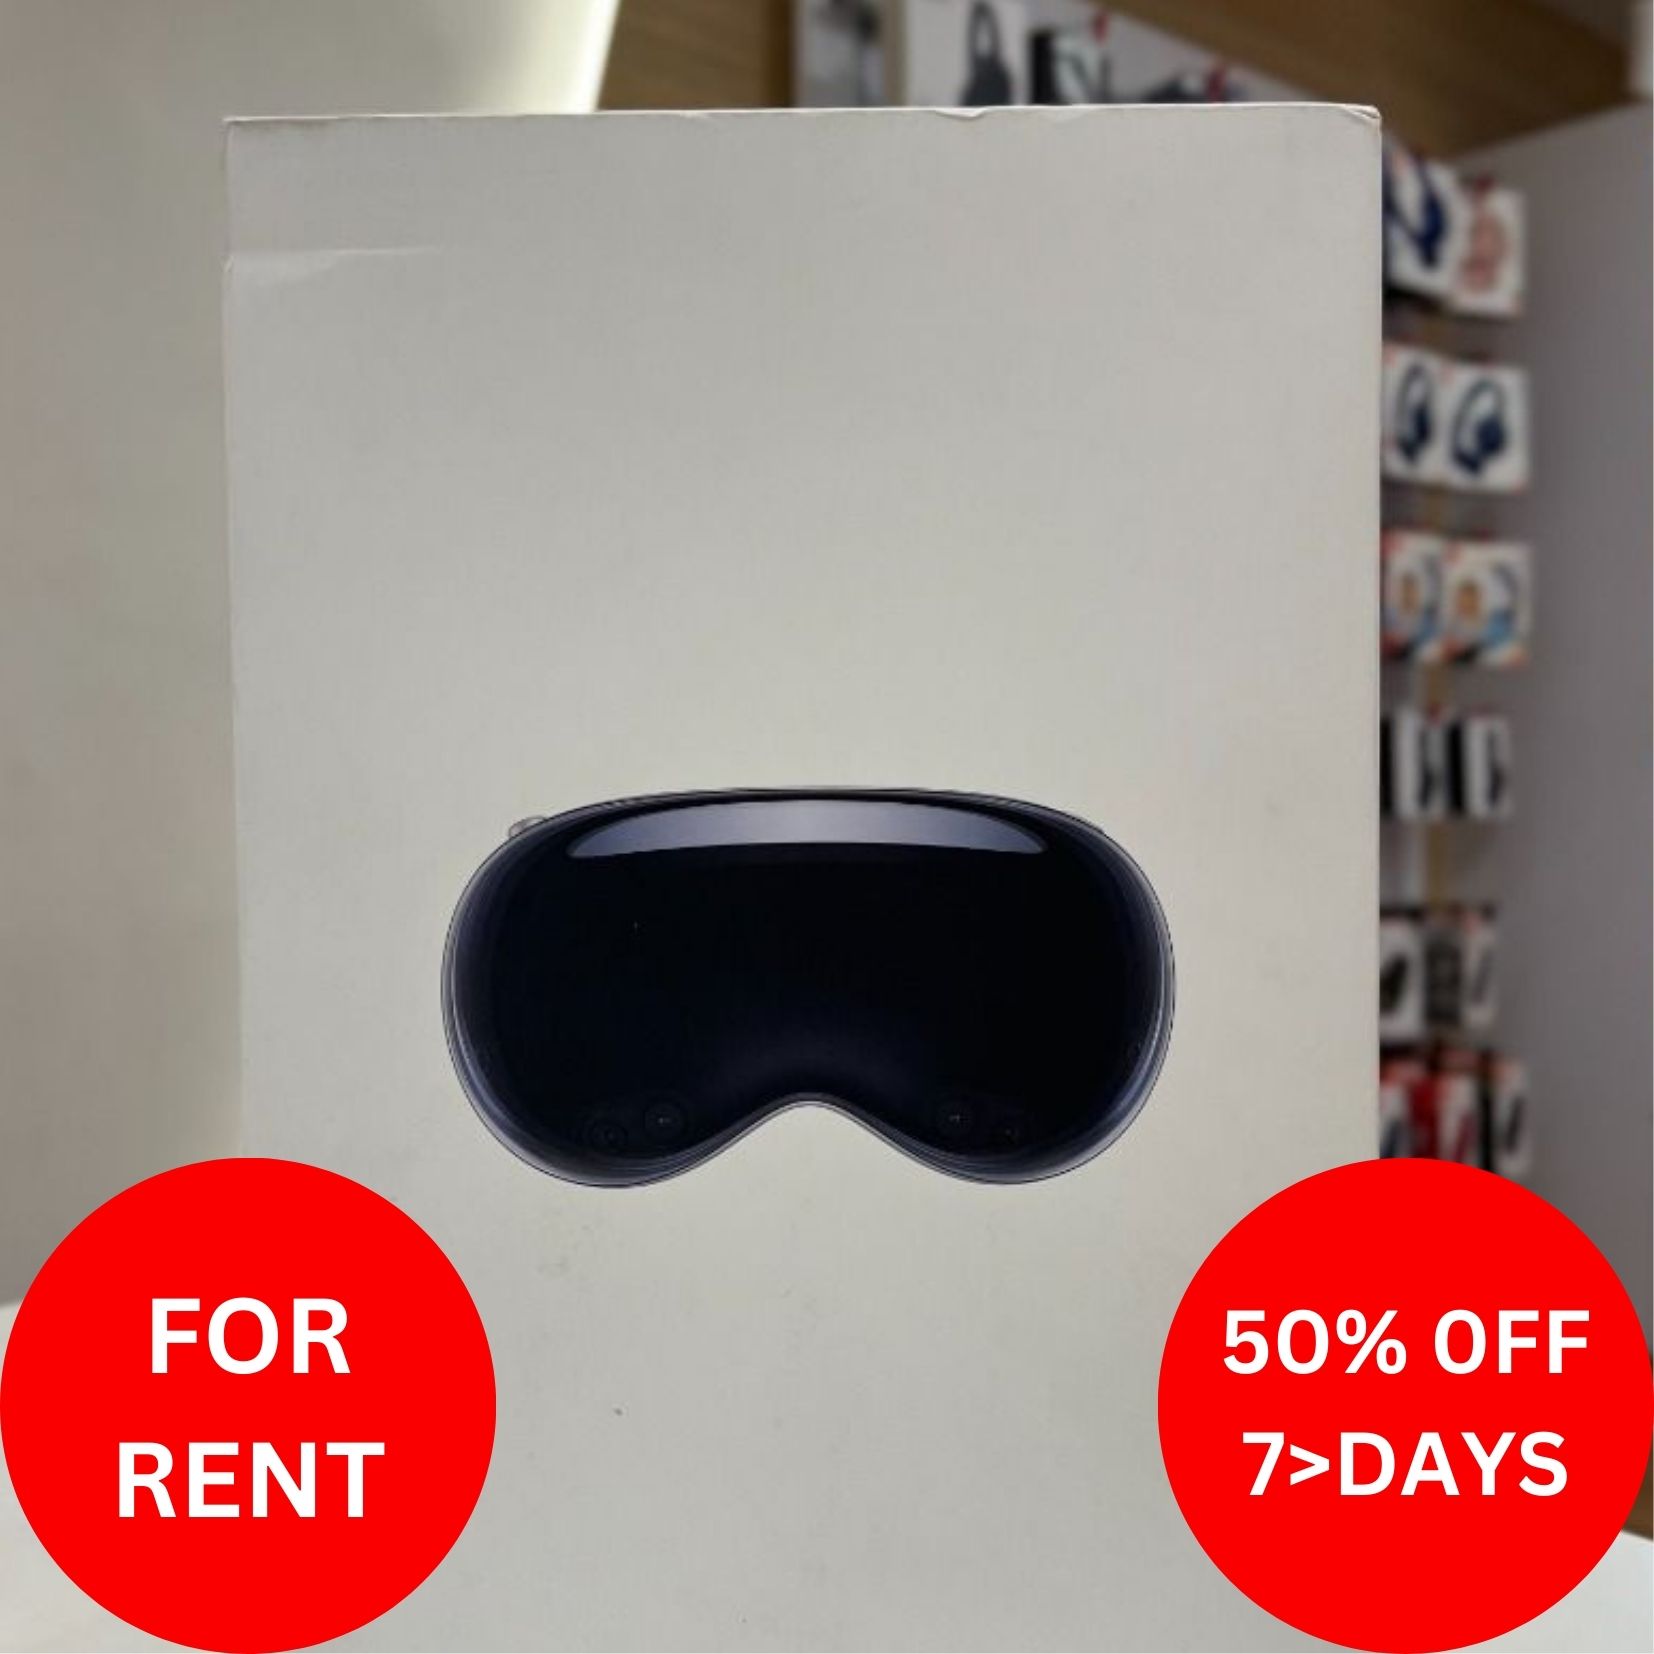 Apple Vision Pro for Rent | Virtual Reality (VR) | RentSmart Asia | Renting Is The New Buying